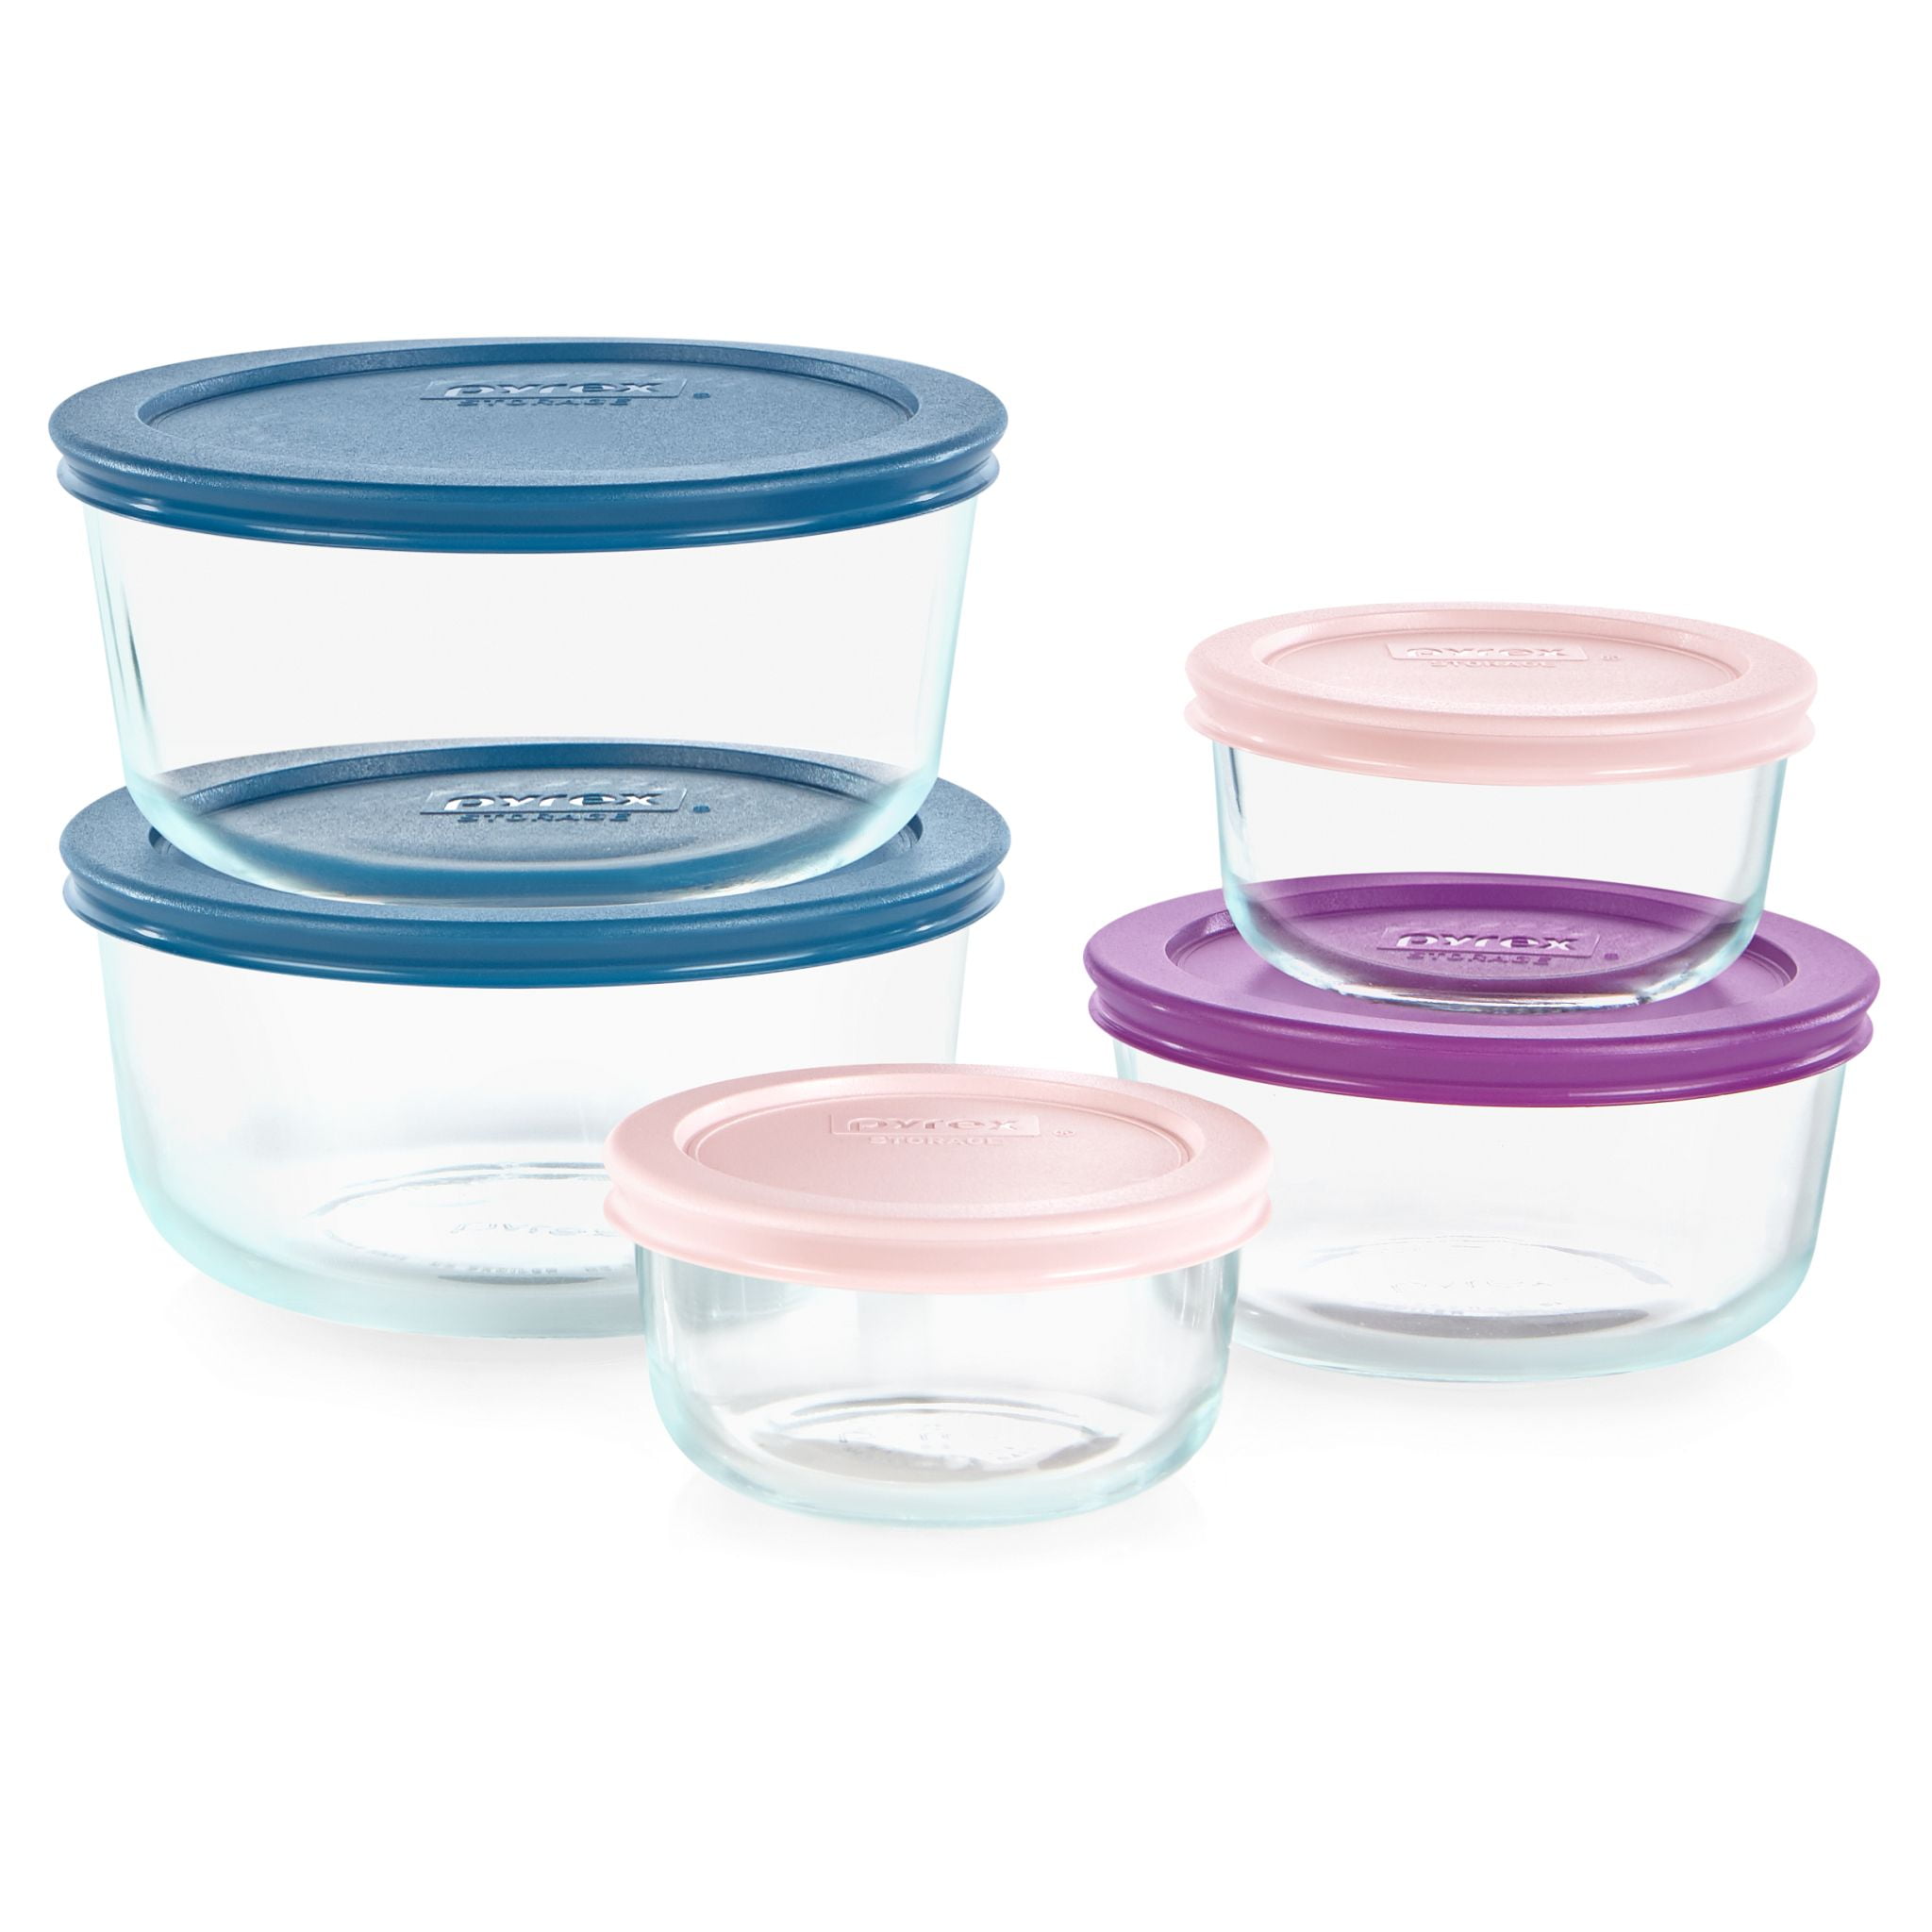 22-Piece Pyrex Glass Food Storage Set (11 Containers + 11 Lids) only $25.49